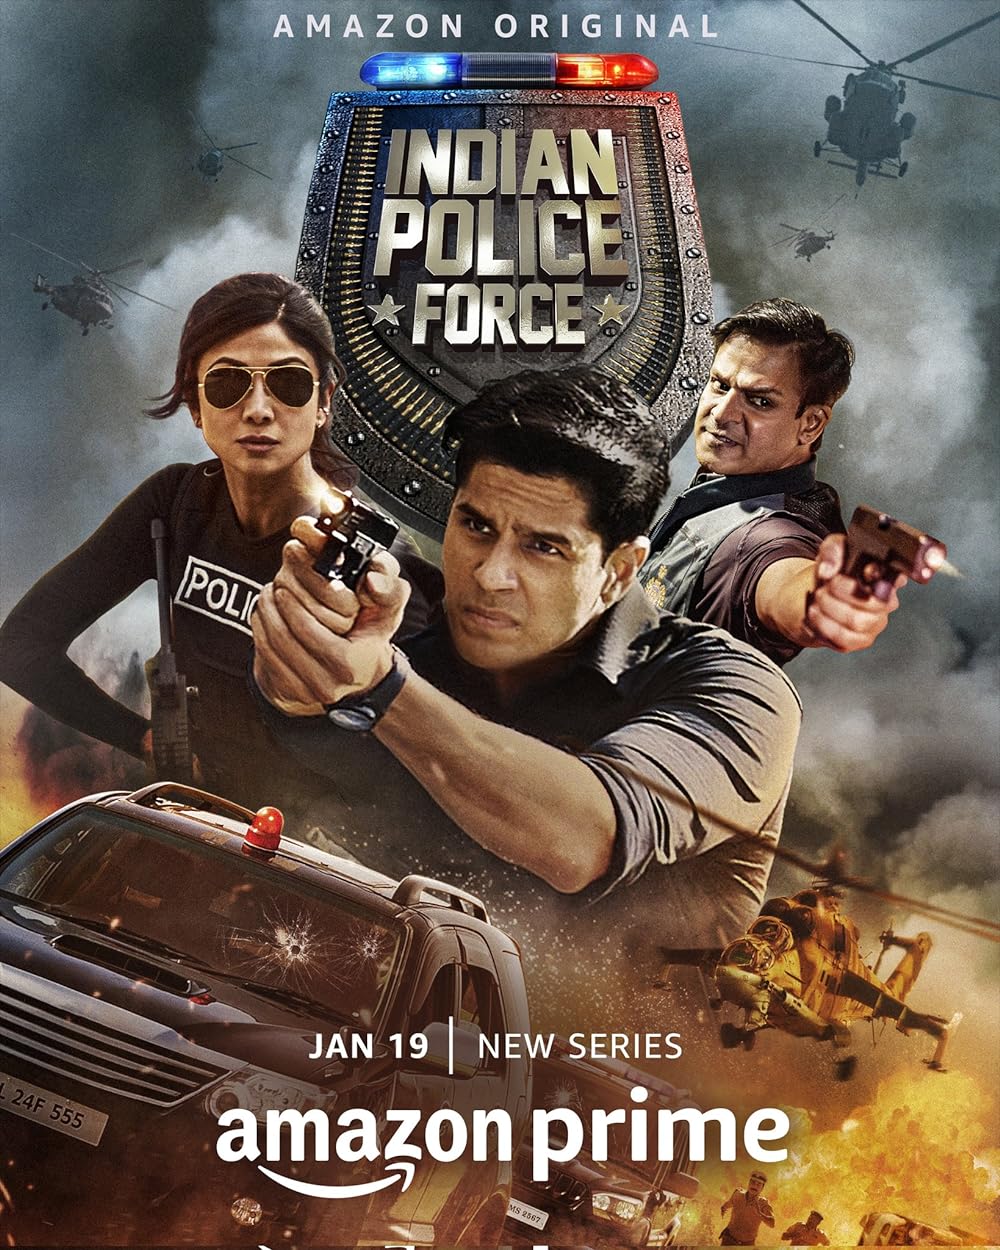 Indian Police Force'Police Force Season 1' showcases brave cops chasing the mastermind of bomb blasts in the city, promising intense action across seven episodes.